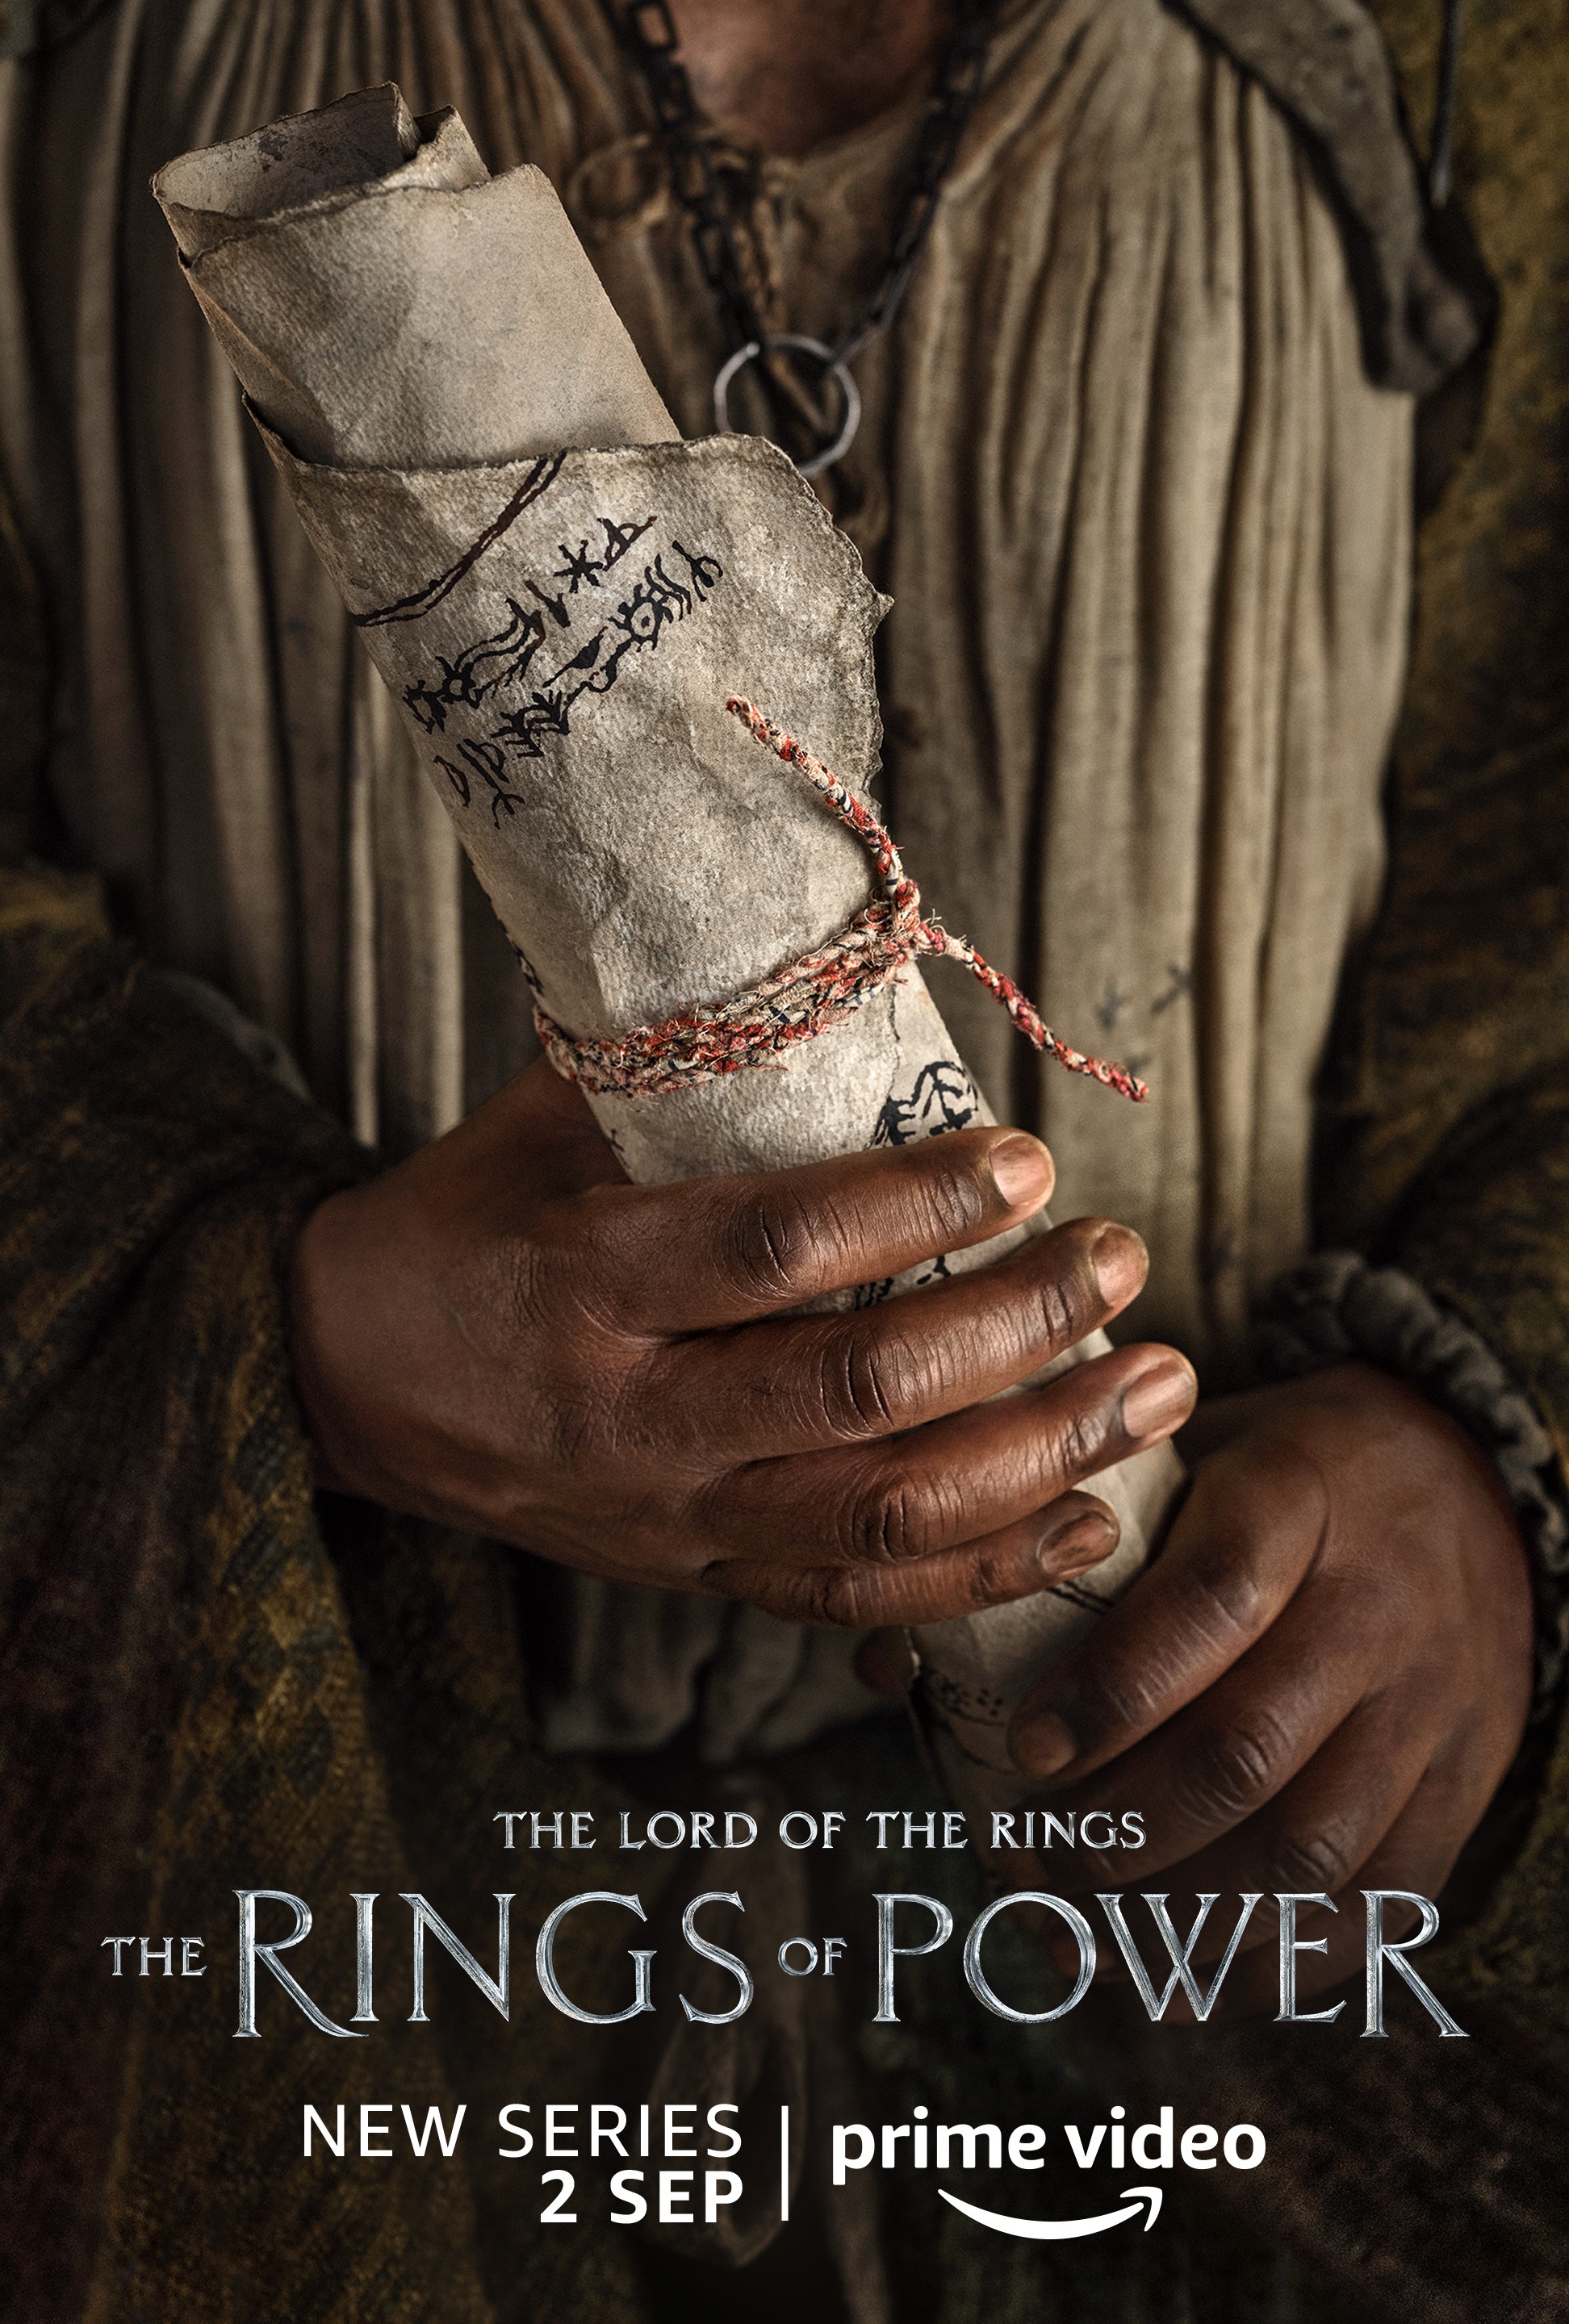 A person holding a map character poster for Lord of the Rings: The Rings of Power